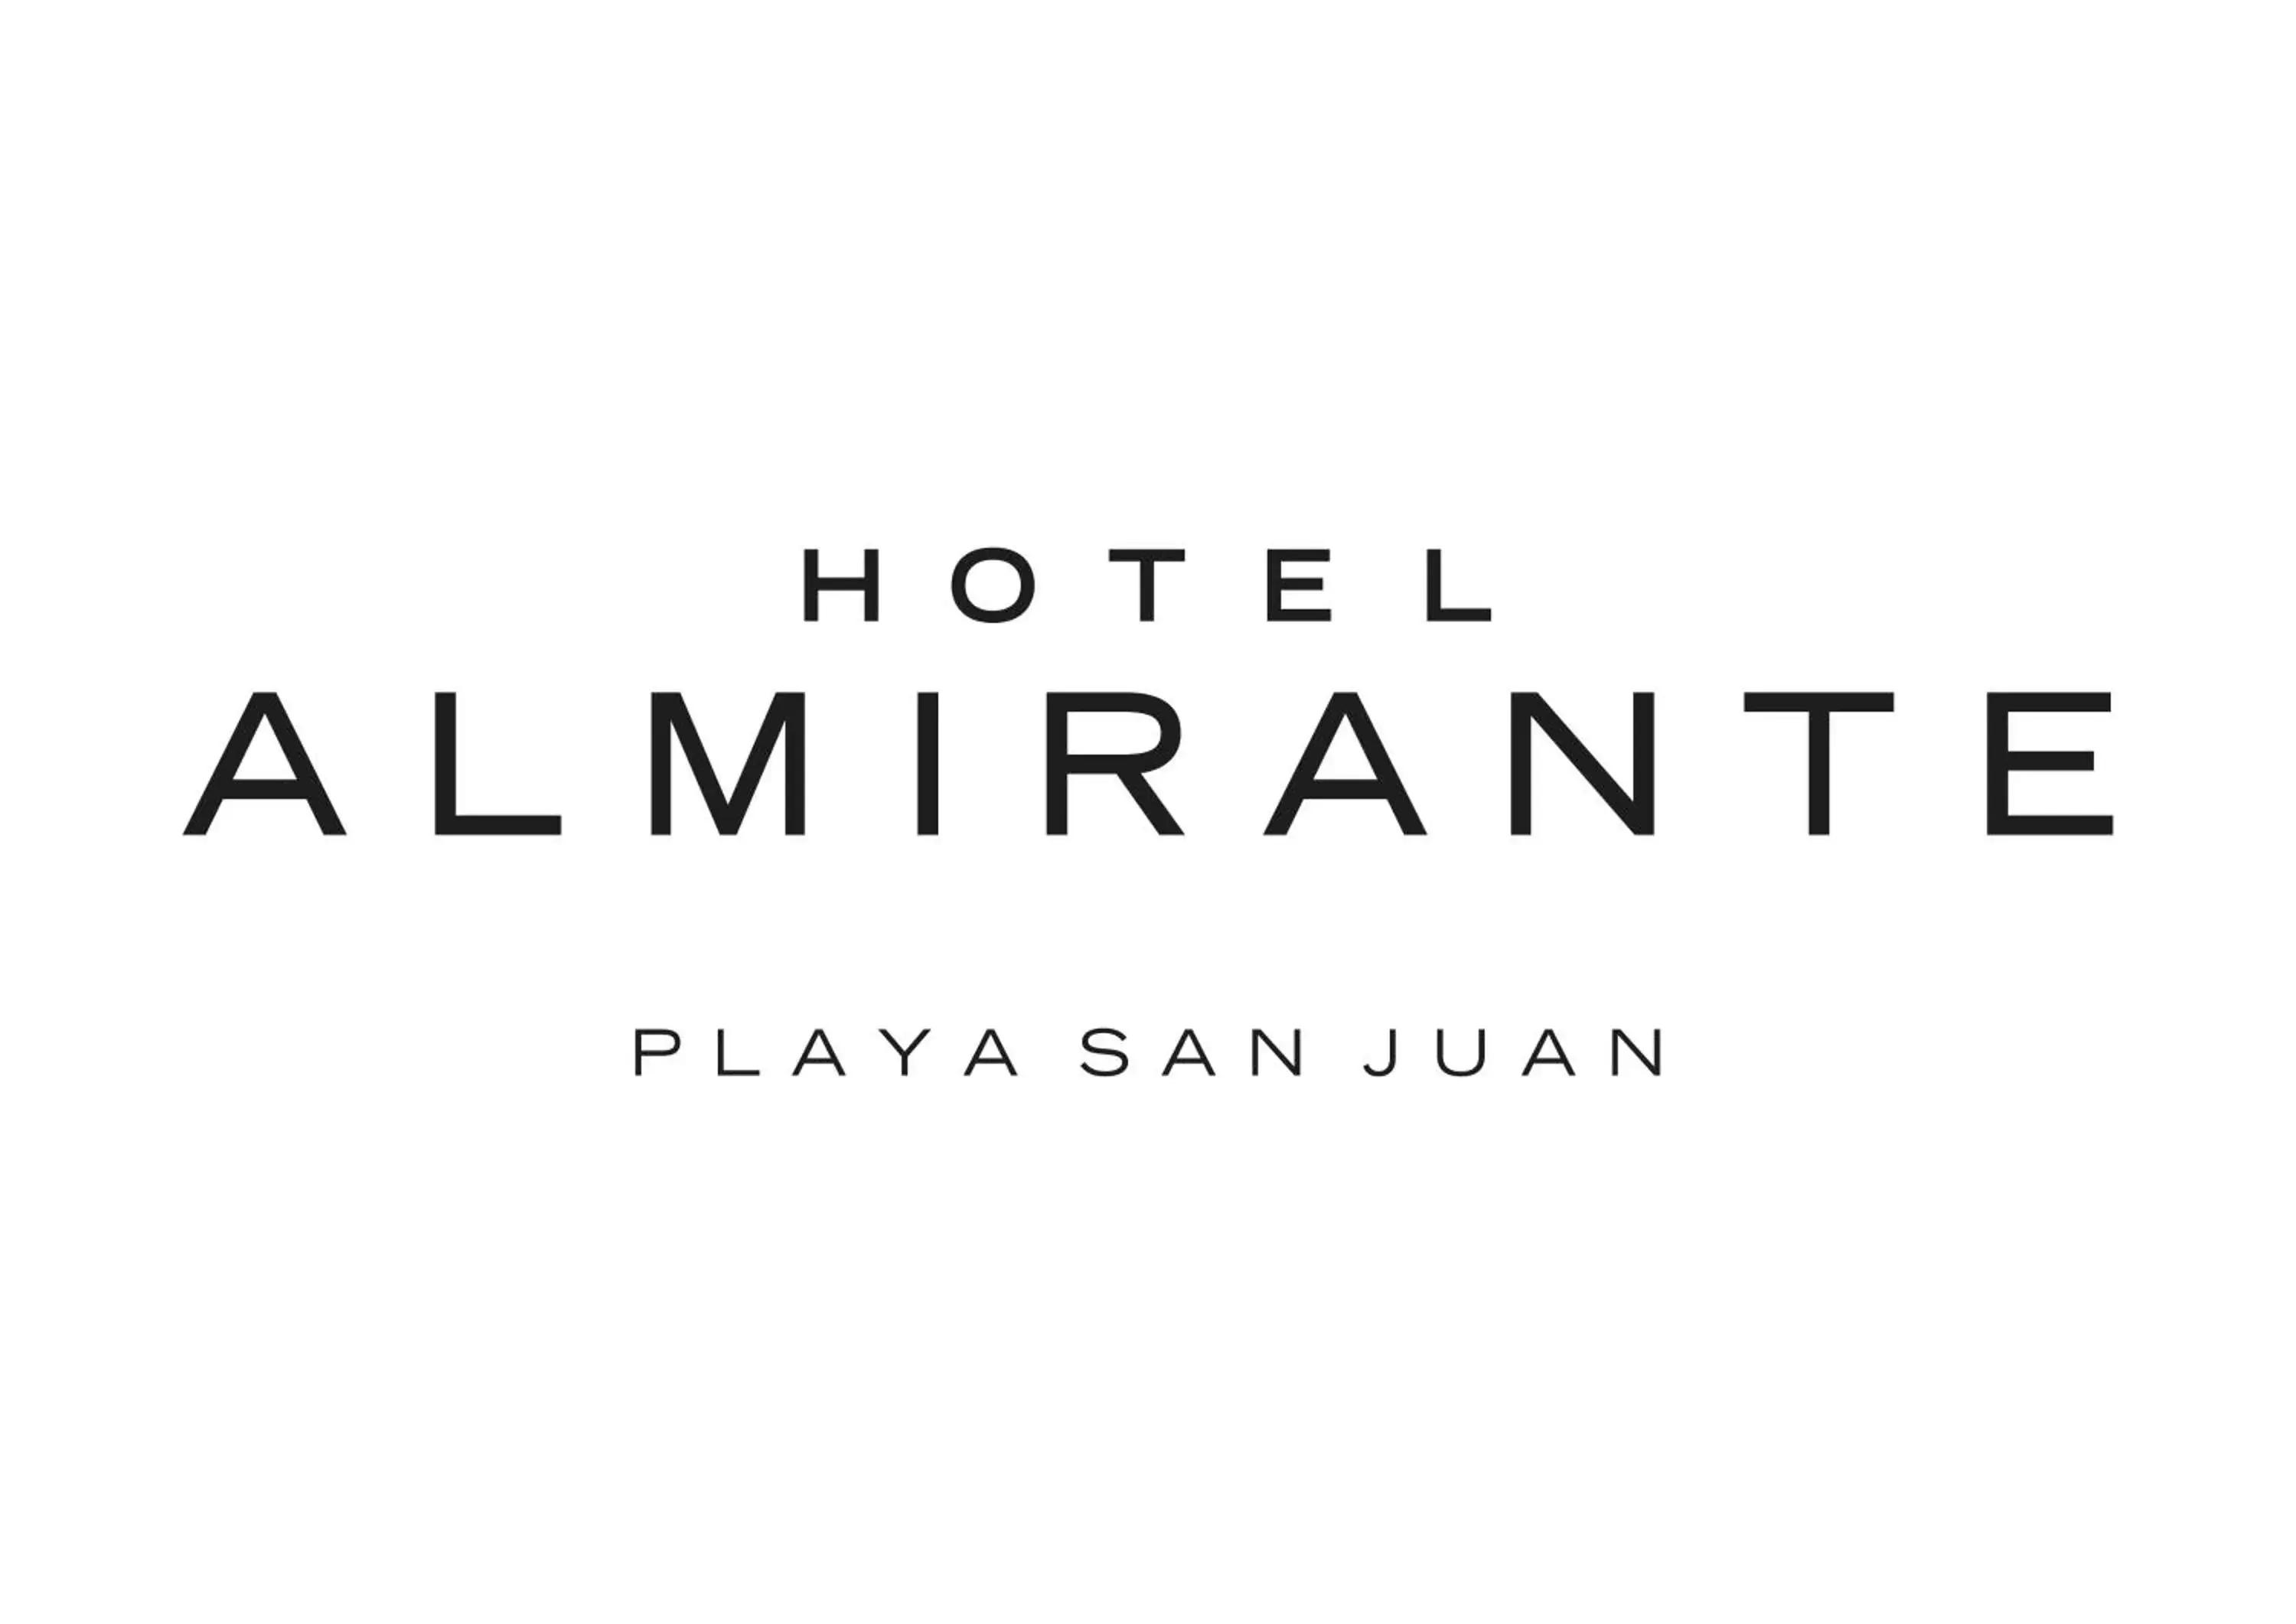 Property logo or sign in Hotel Almirante